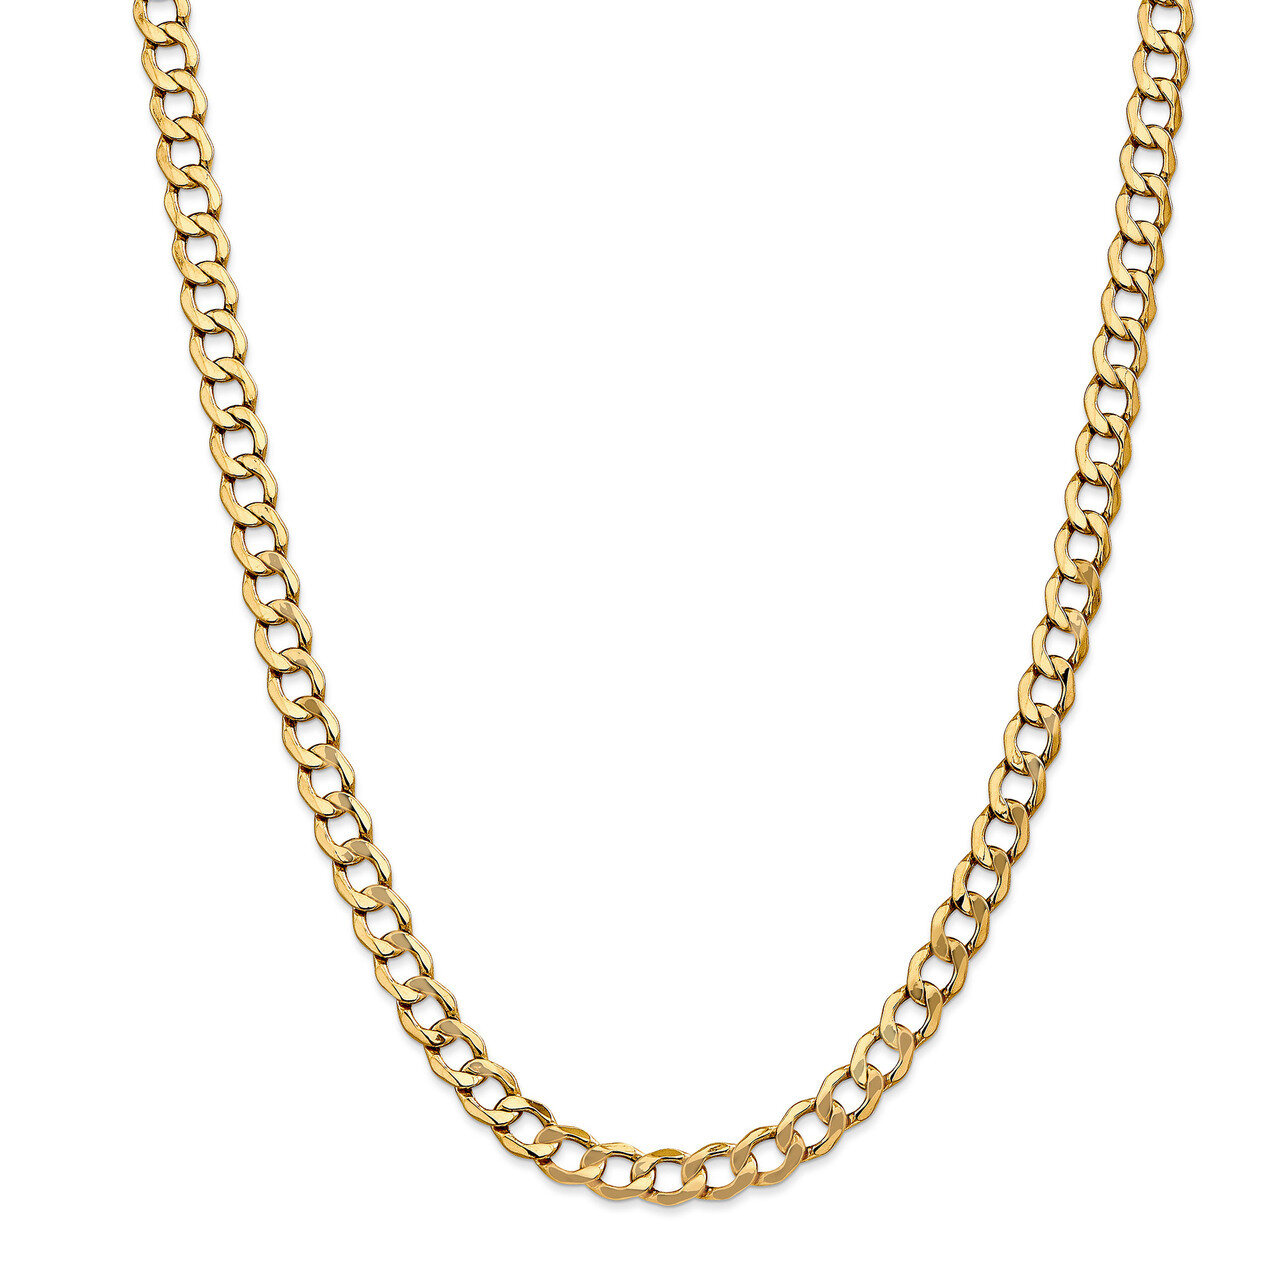 26 Inch 7.0mm Semi-Solid Curb Link Chain 14k Gold BC110-26